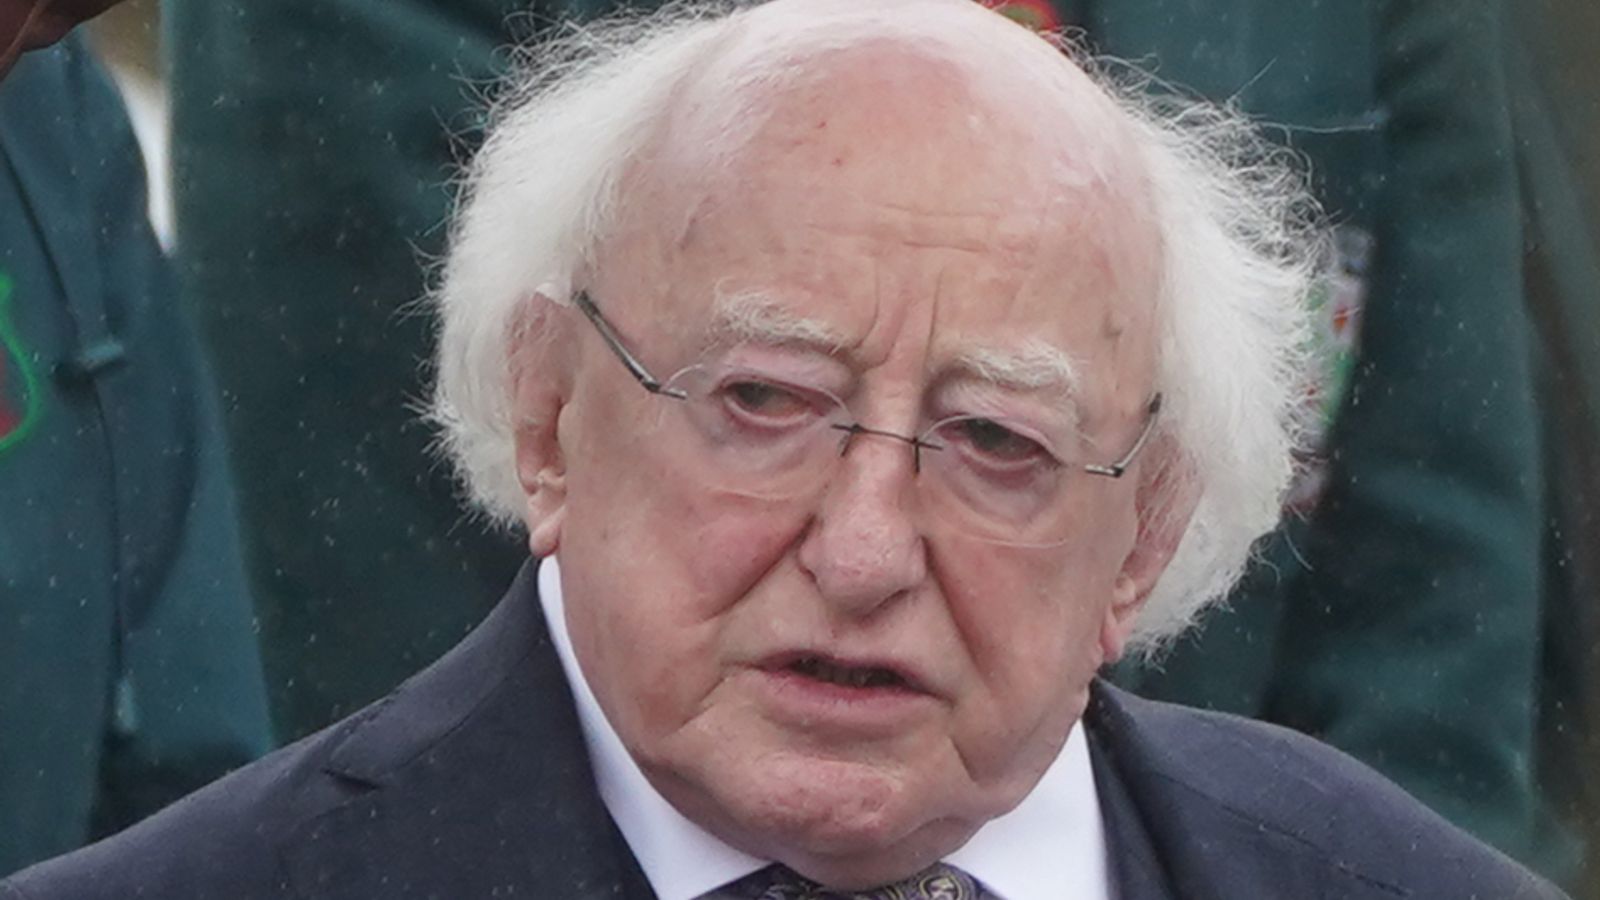 president of ireland 'in excellent spirits' but will remain in hospital overnight after tests